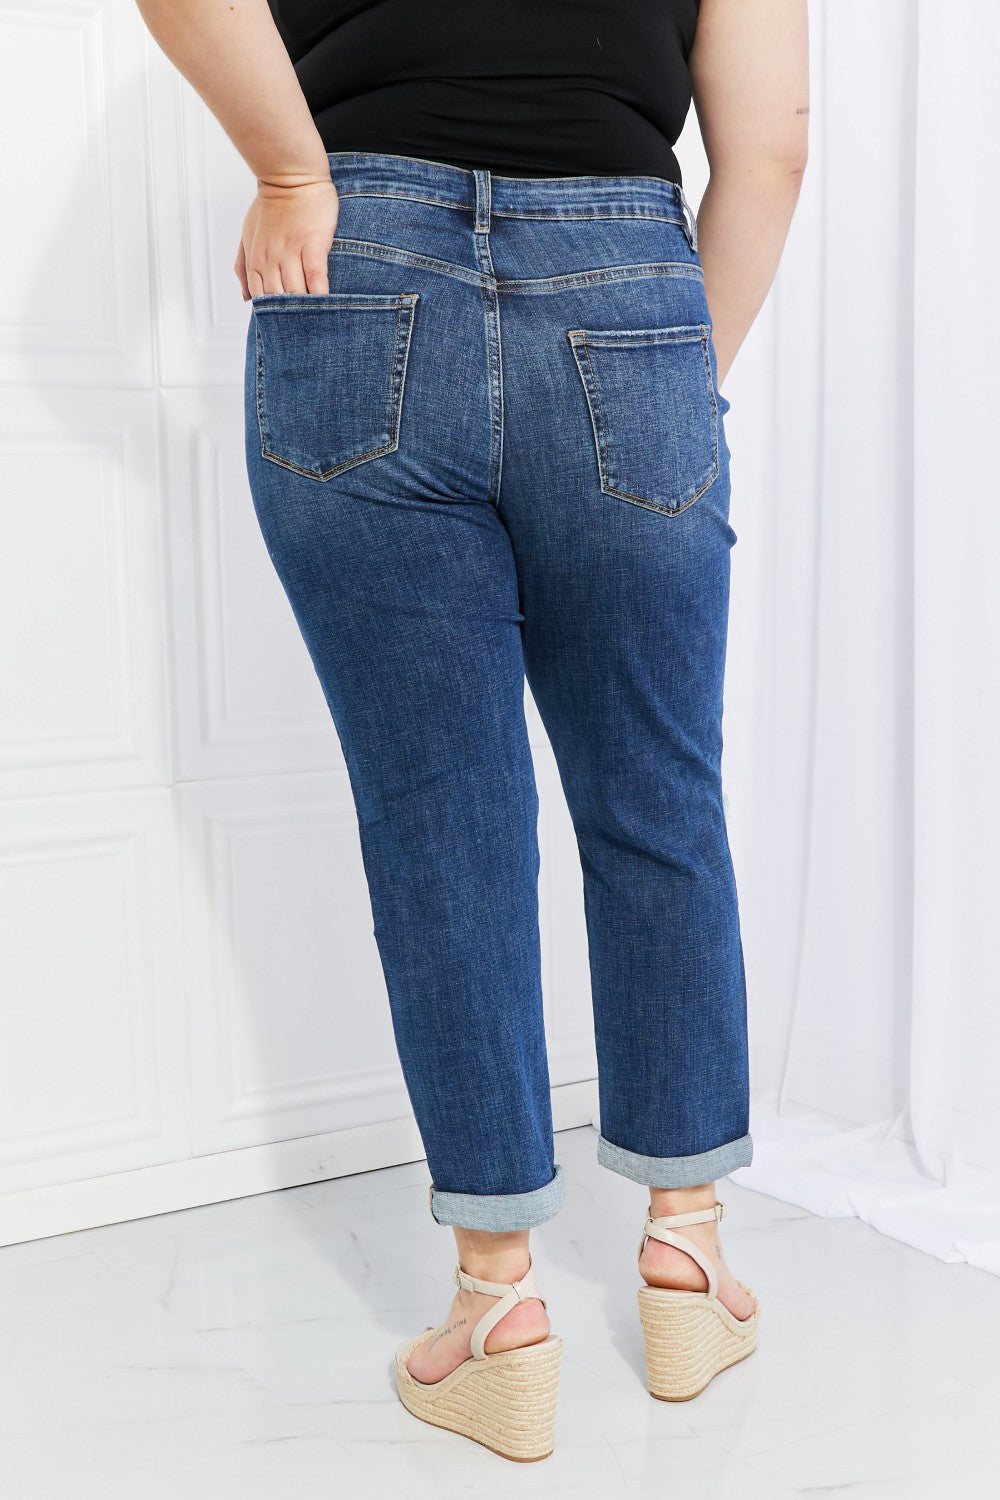 VERVET Full Size Distressed Cropped Jeans with Pockets- ONLINE ONLY 2-10 day Shipping